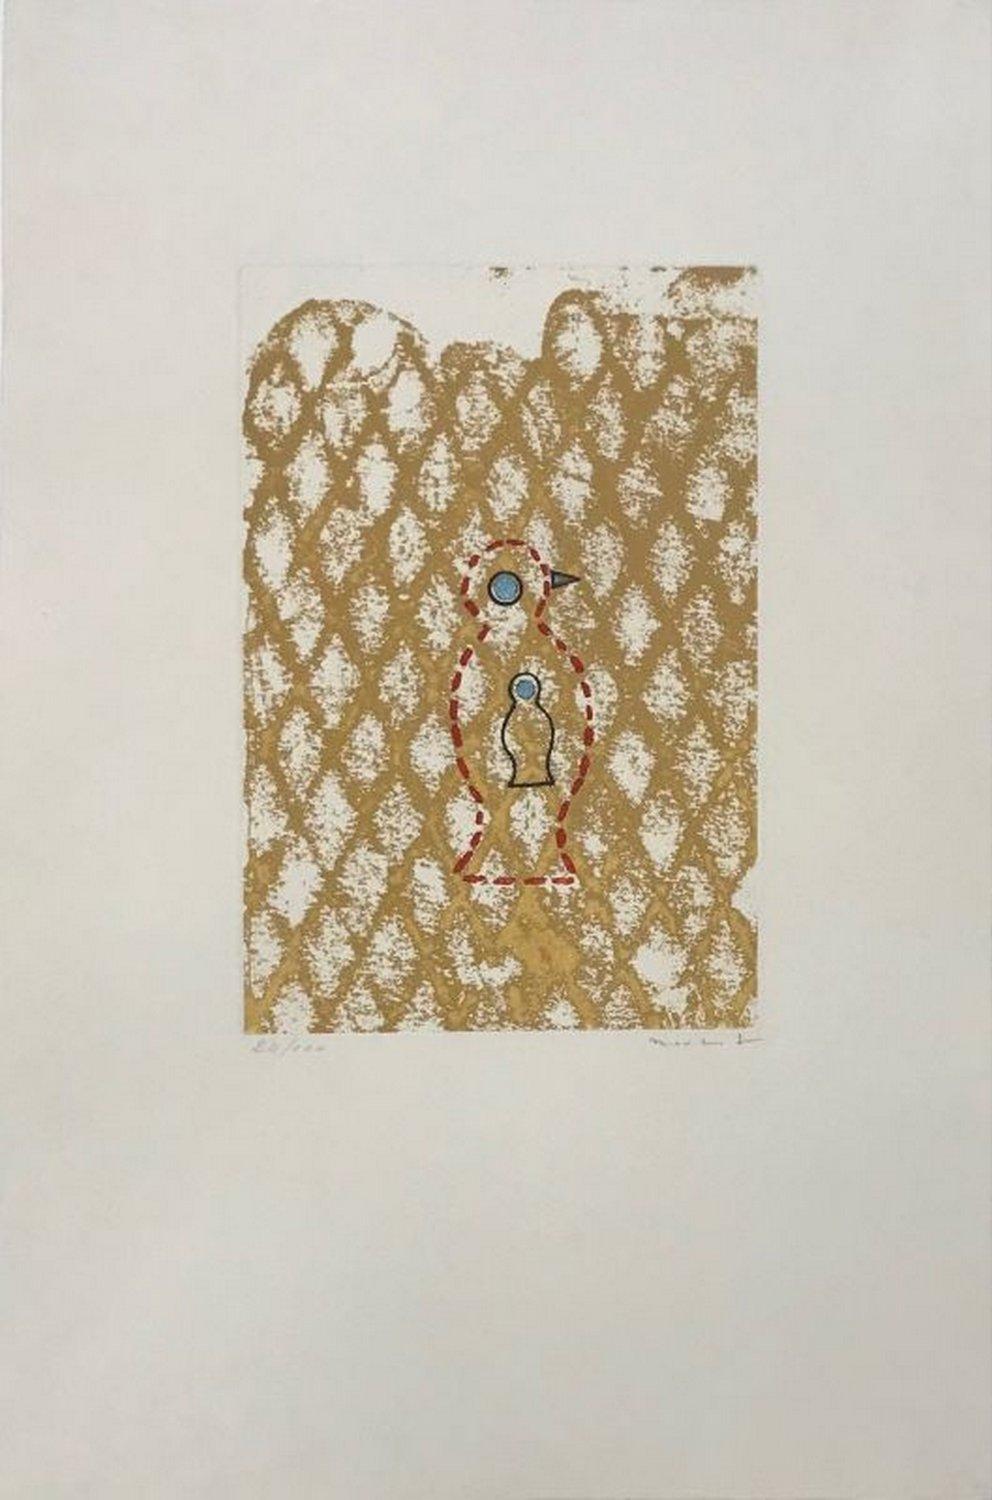 Penguin  - Print by Max Ernst